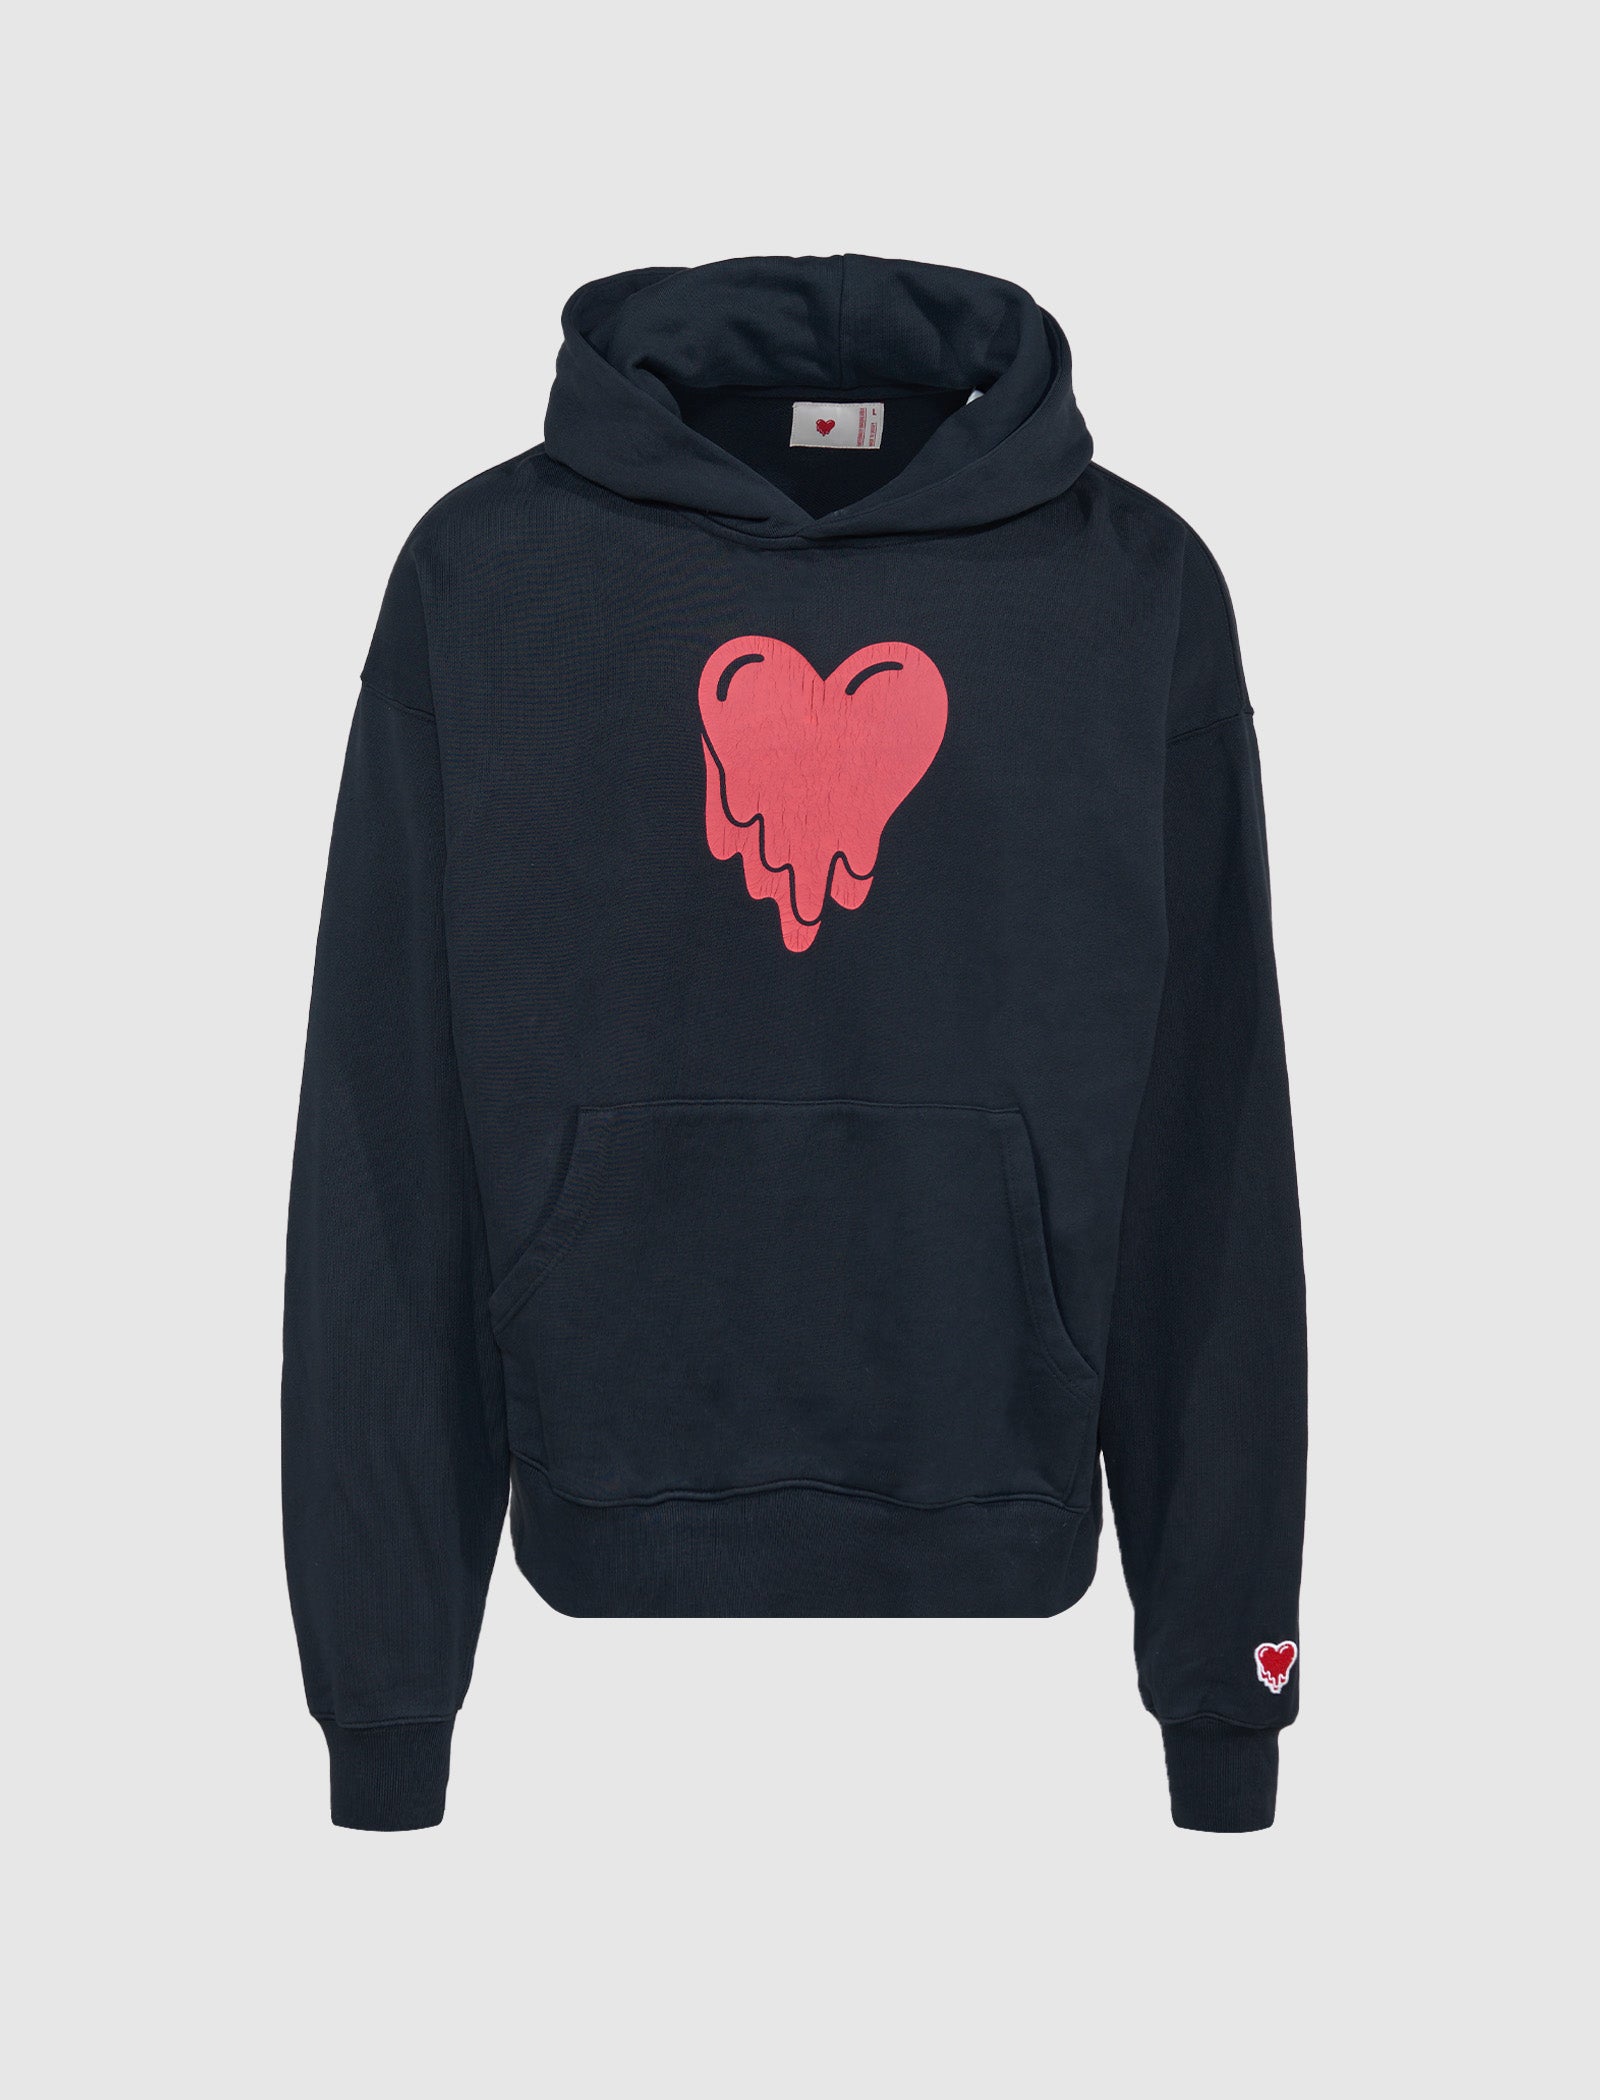 EMOTIONALLY UNAVAILABLE HEART LOGO HOODIE – A Ma Maniere